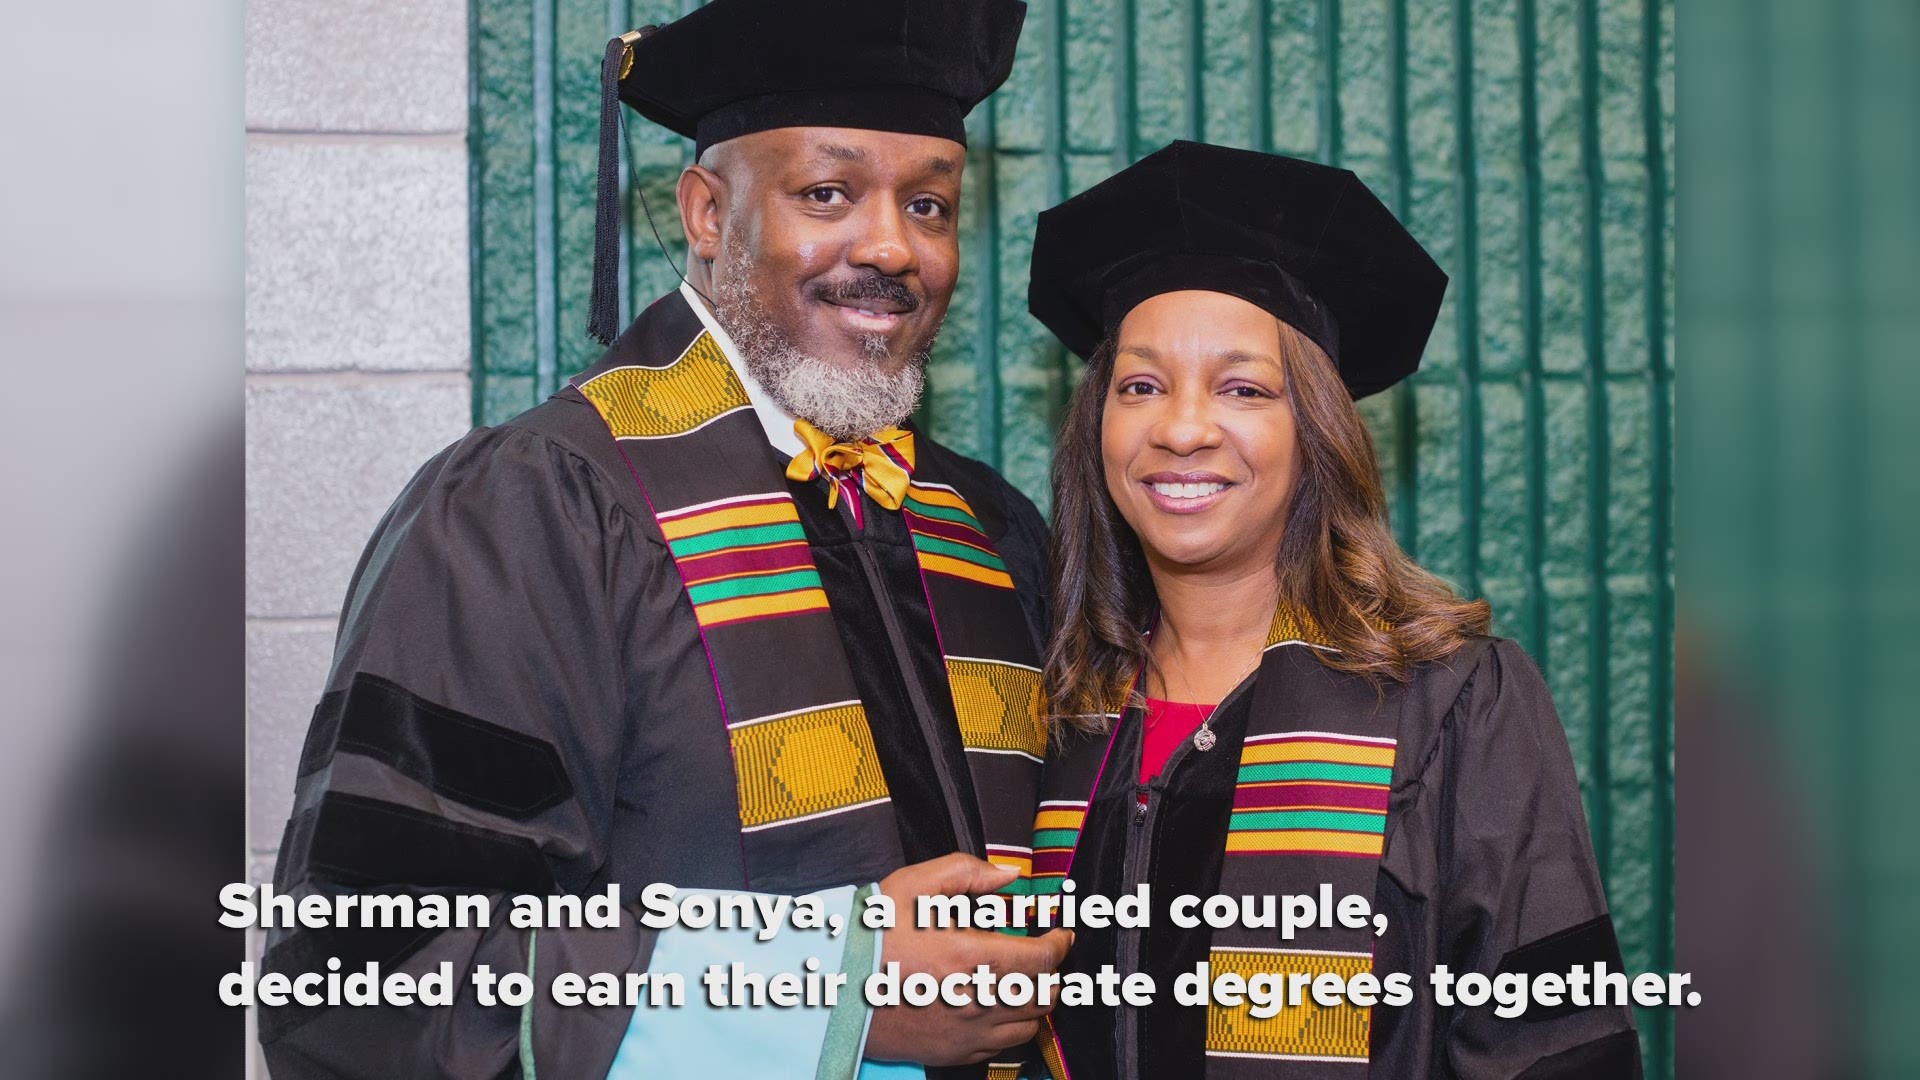 Sherman and Sonya Whitfield not only earner their doctorate together but their master's as well. Congrats y'all!

Video provided by Arkansas Tech University